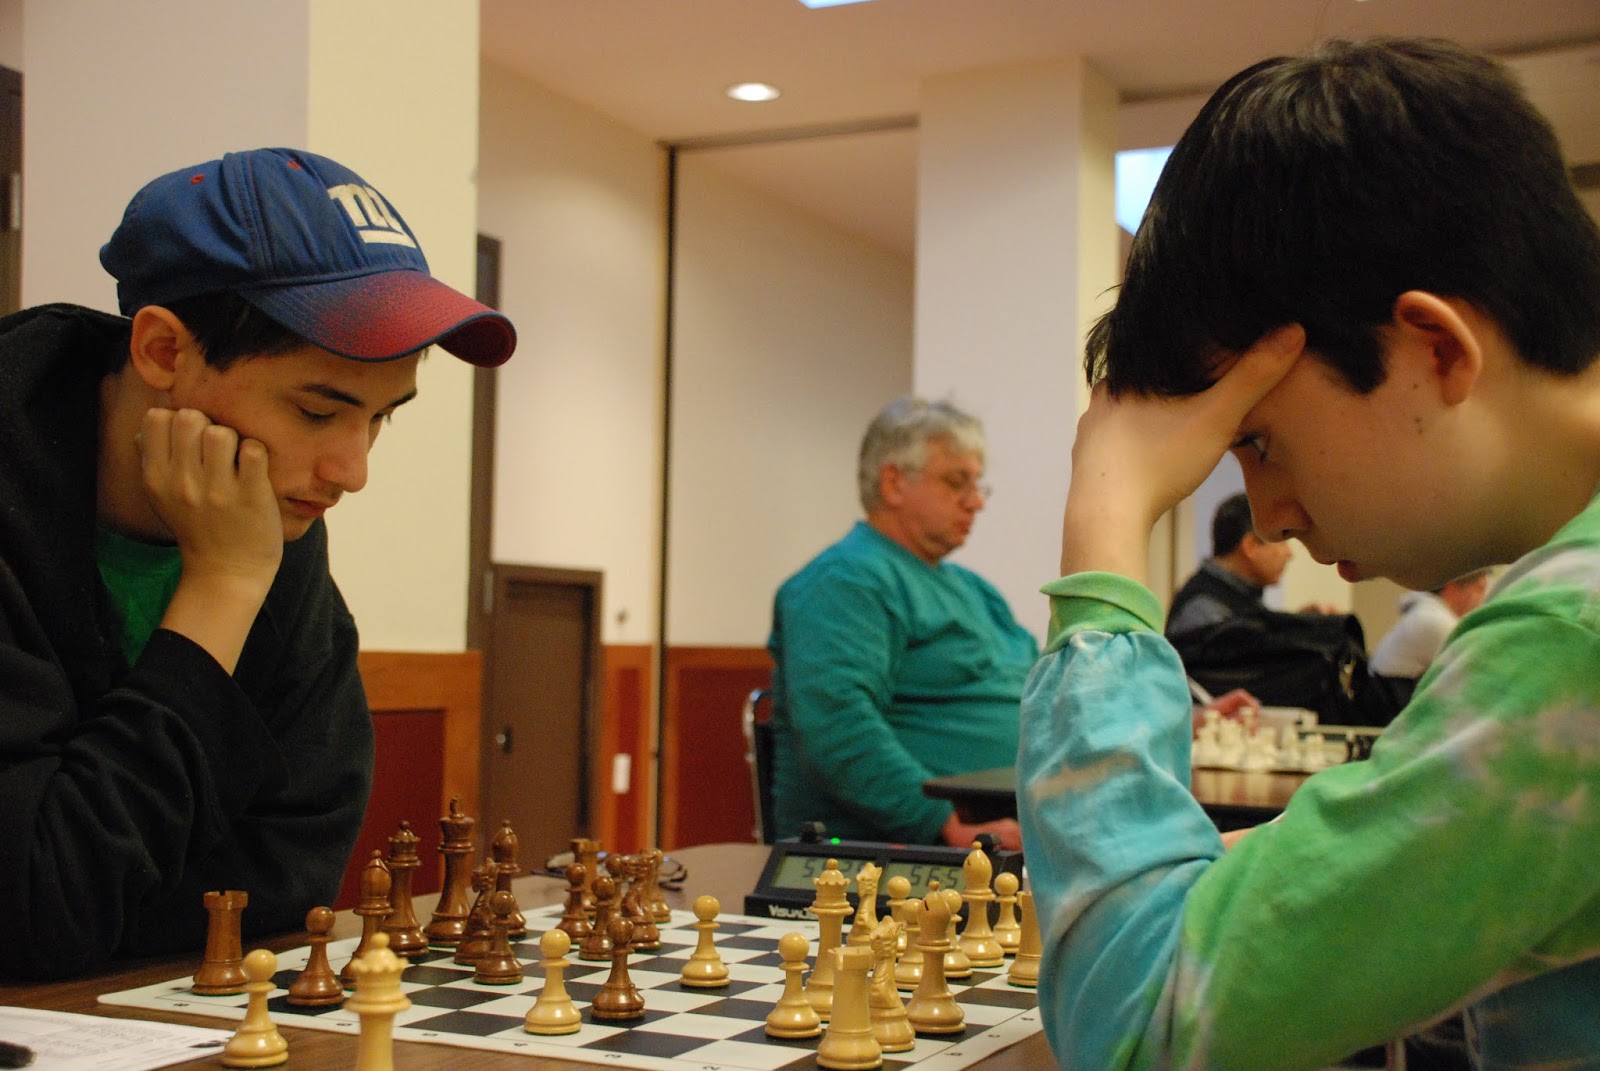 Boston Center for Independent Living - Are you a chess player? BCIL is  looking for chess players for a possible fundraising tournament. All skill  levels accepted. Email Susan at ssmith@bostoncil.org if you